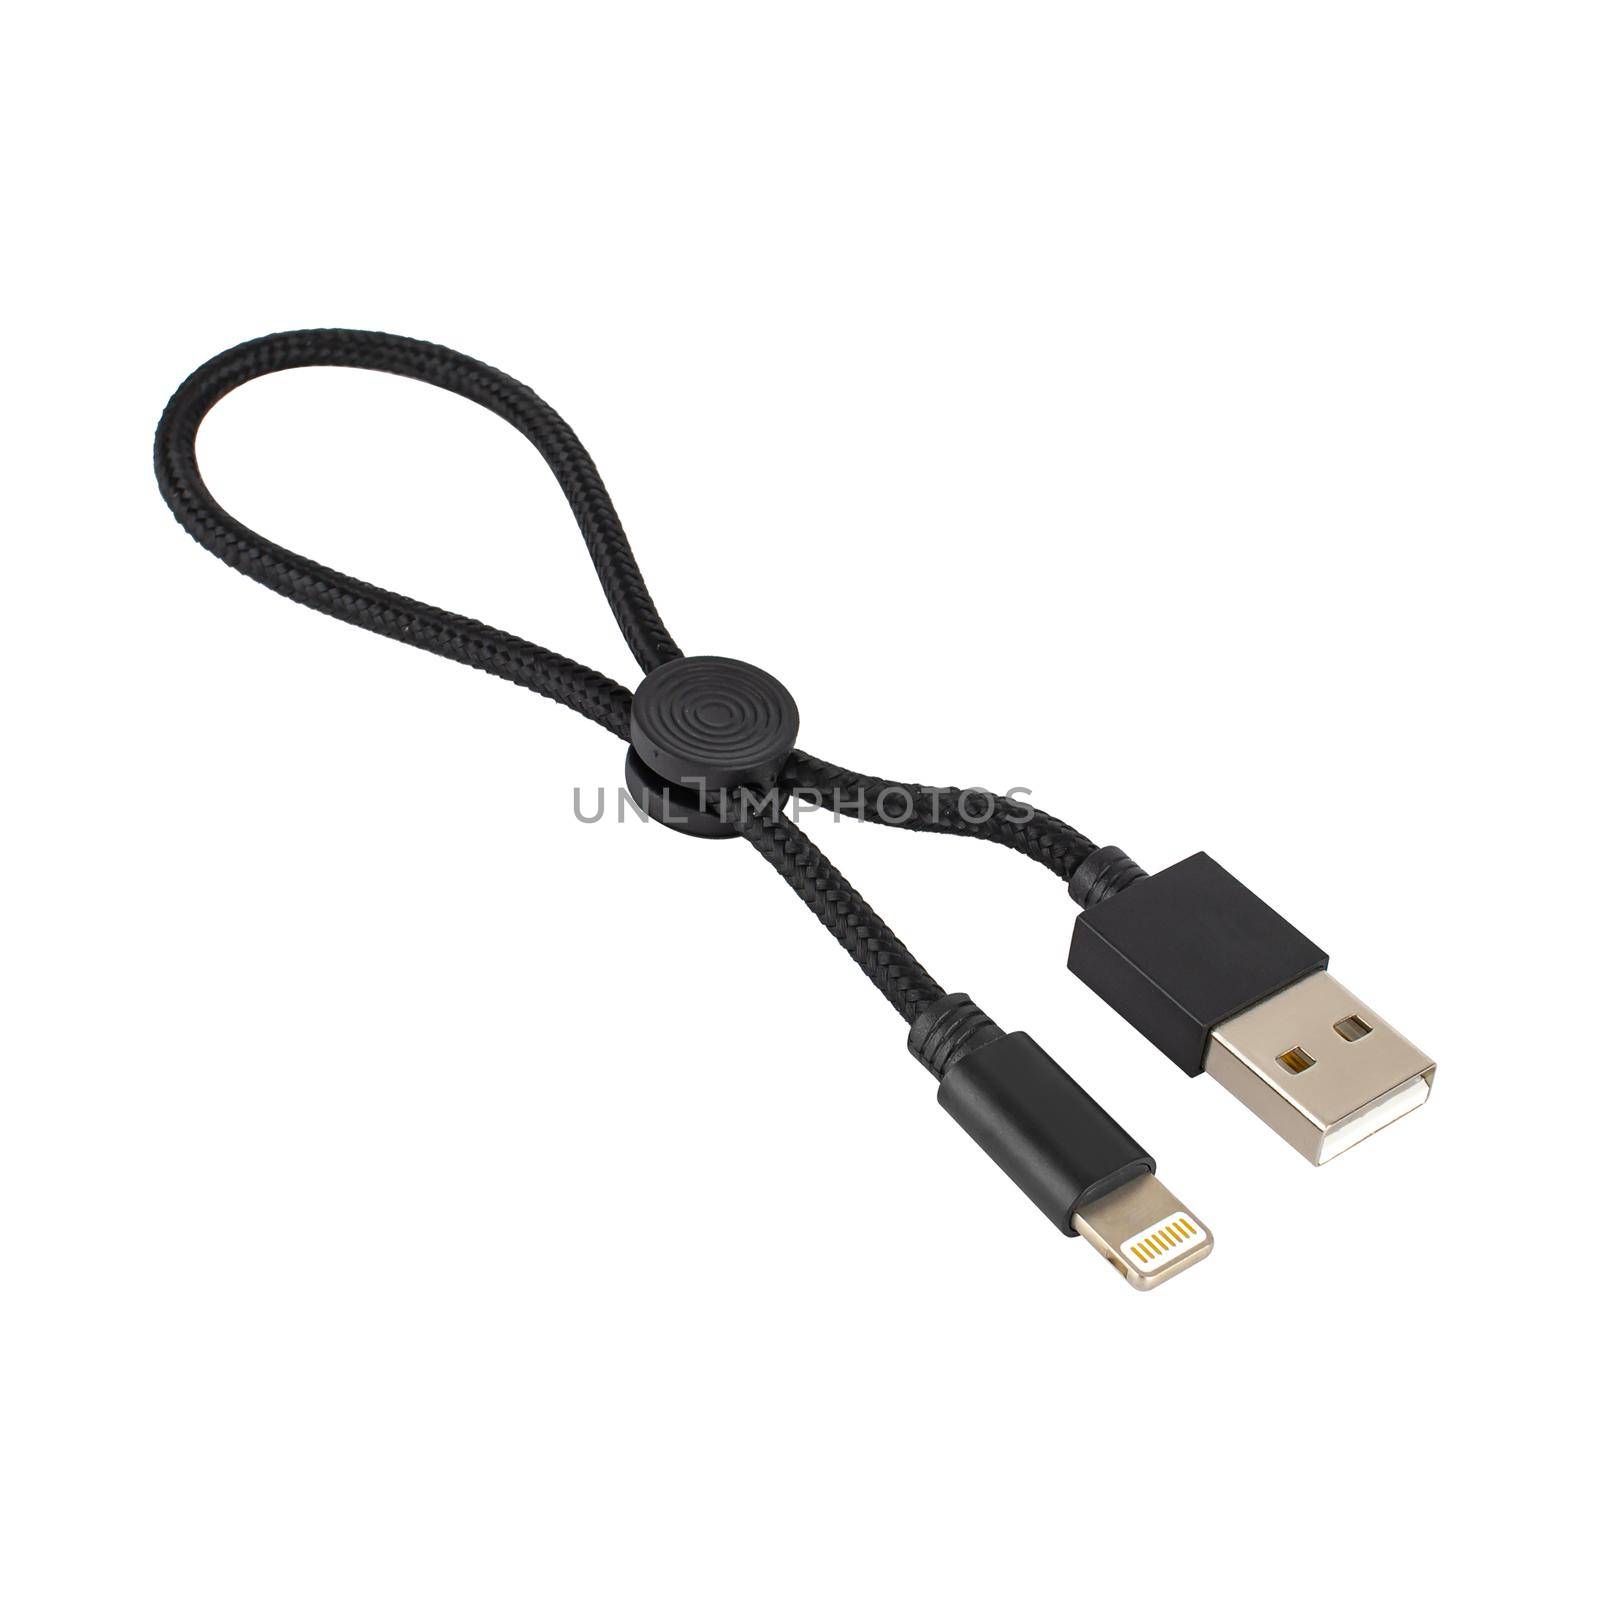 connector with cable, USB, Lightning, black, white background